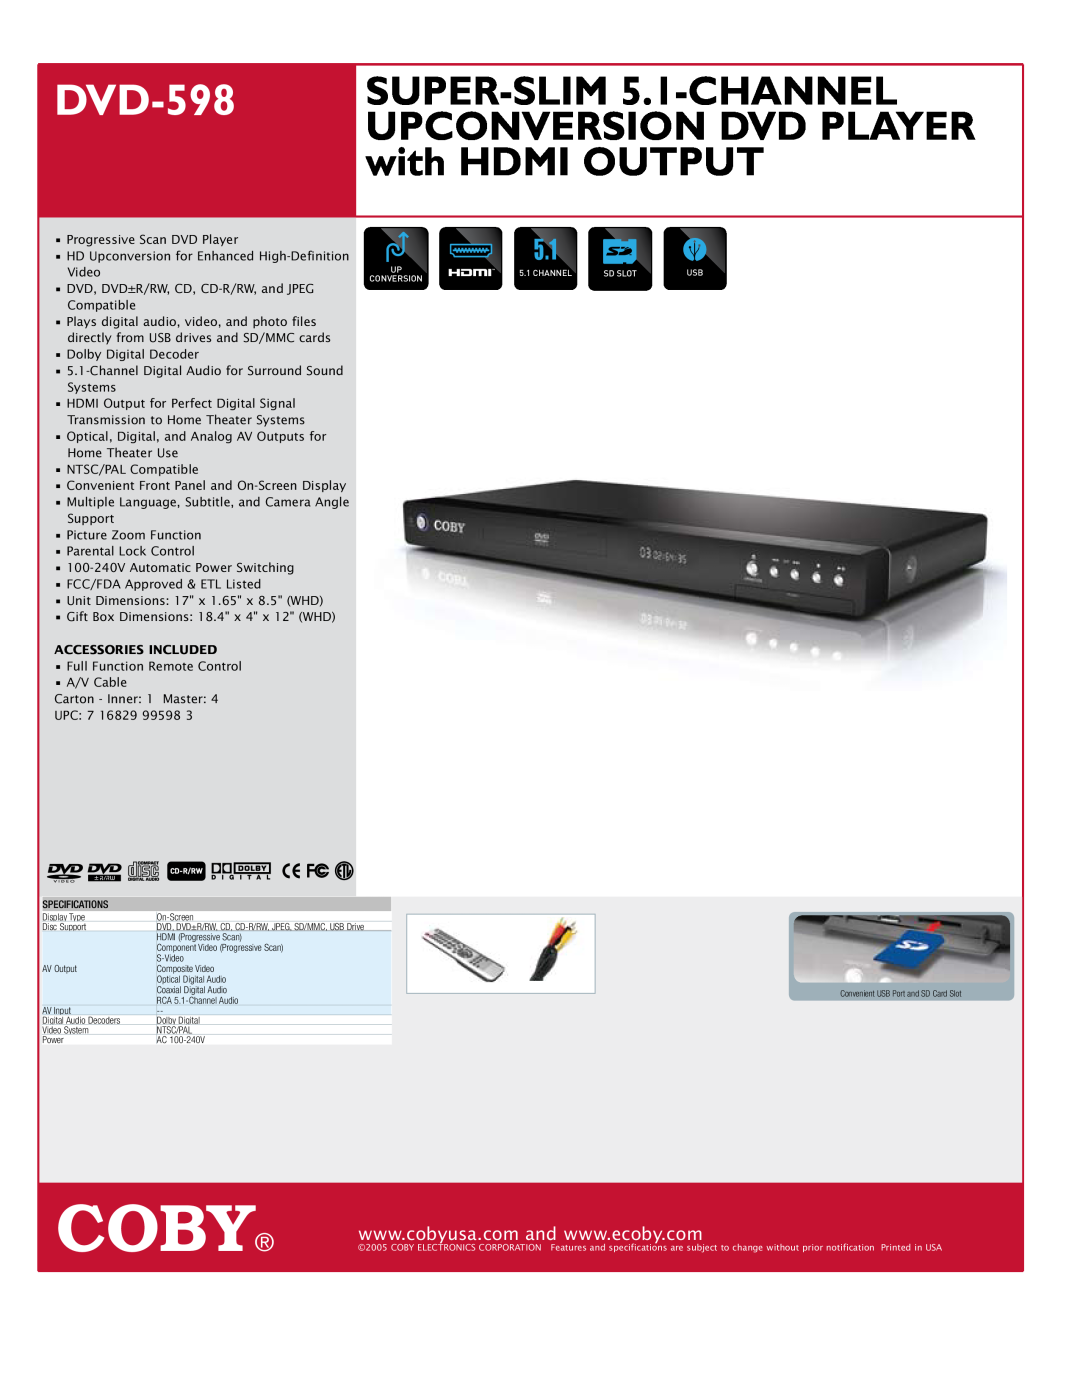 COBY electronic DVD-598 specifications Coby, SUPER-SLIM 5.1-CHANNEL, Upconversion Dvd Player, with HDMI OUTPUT 